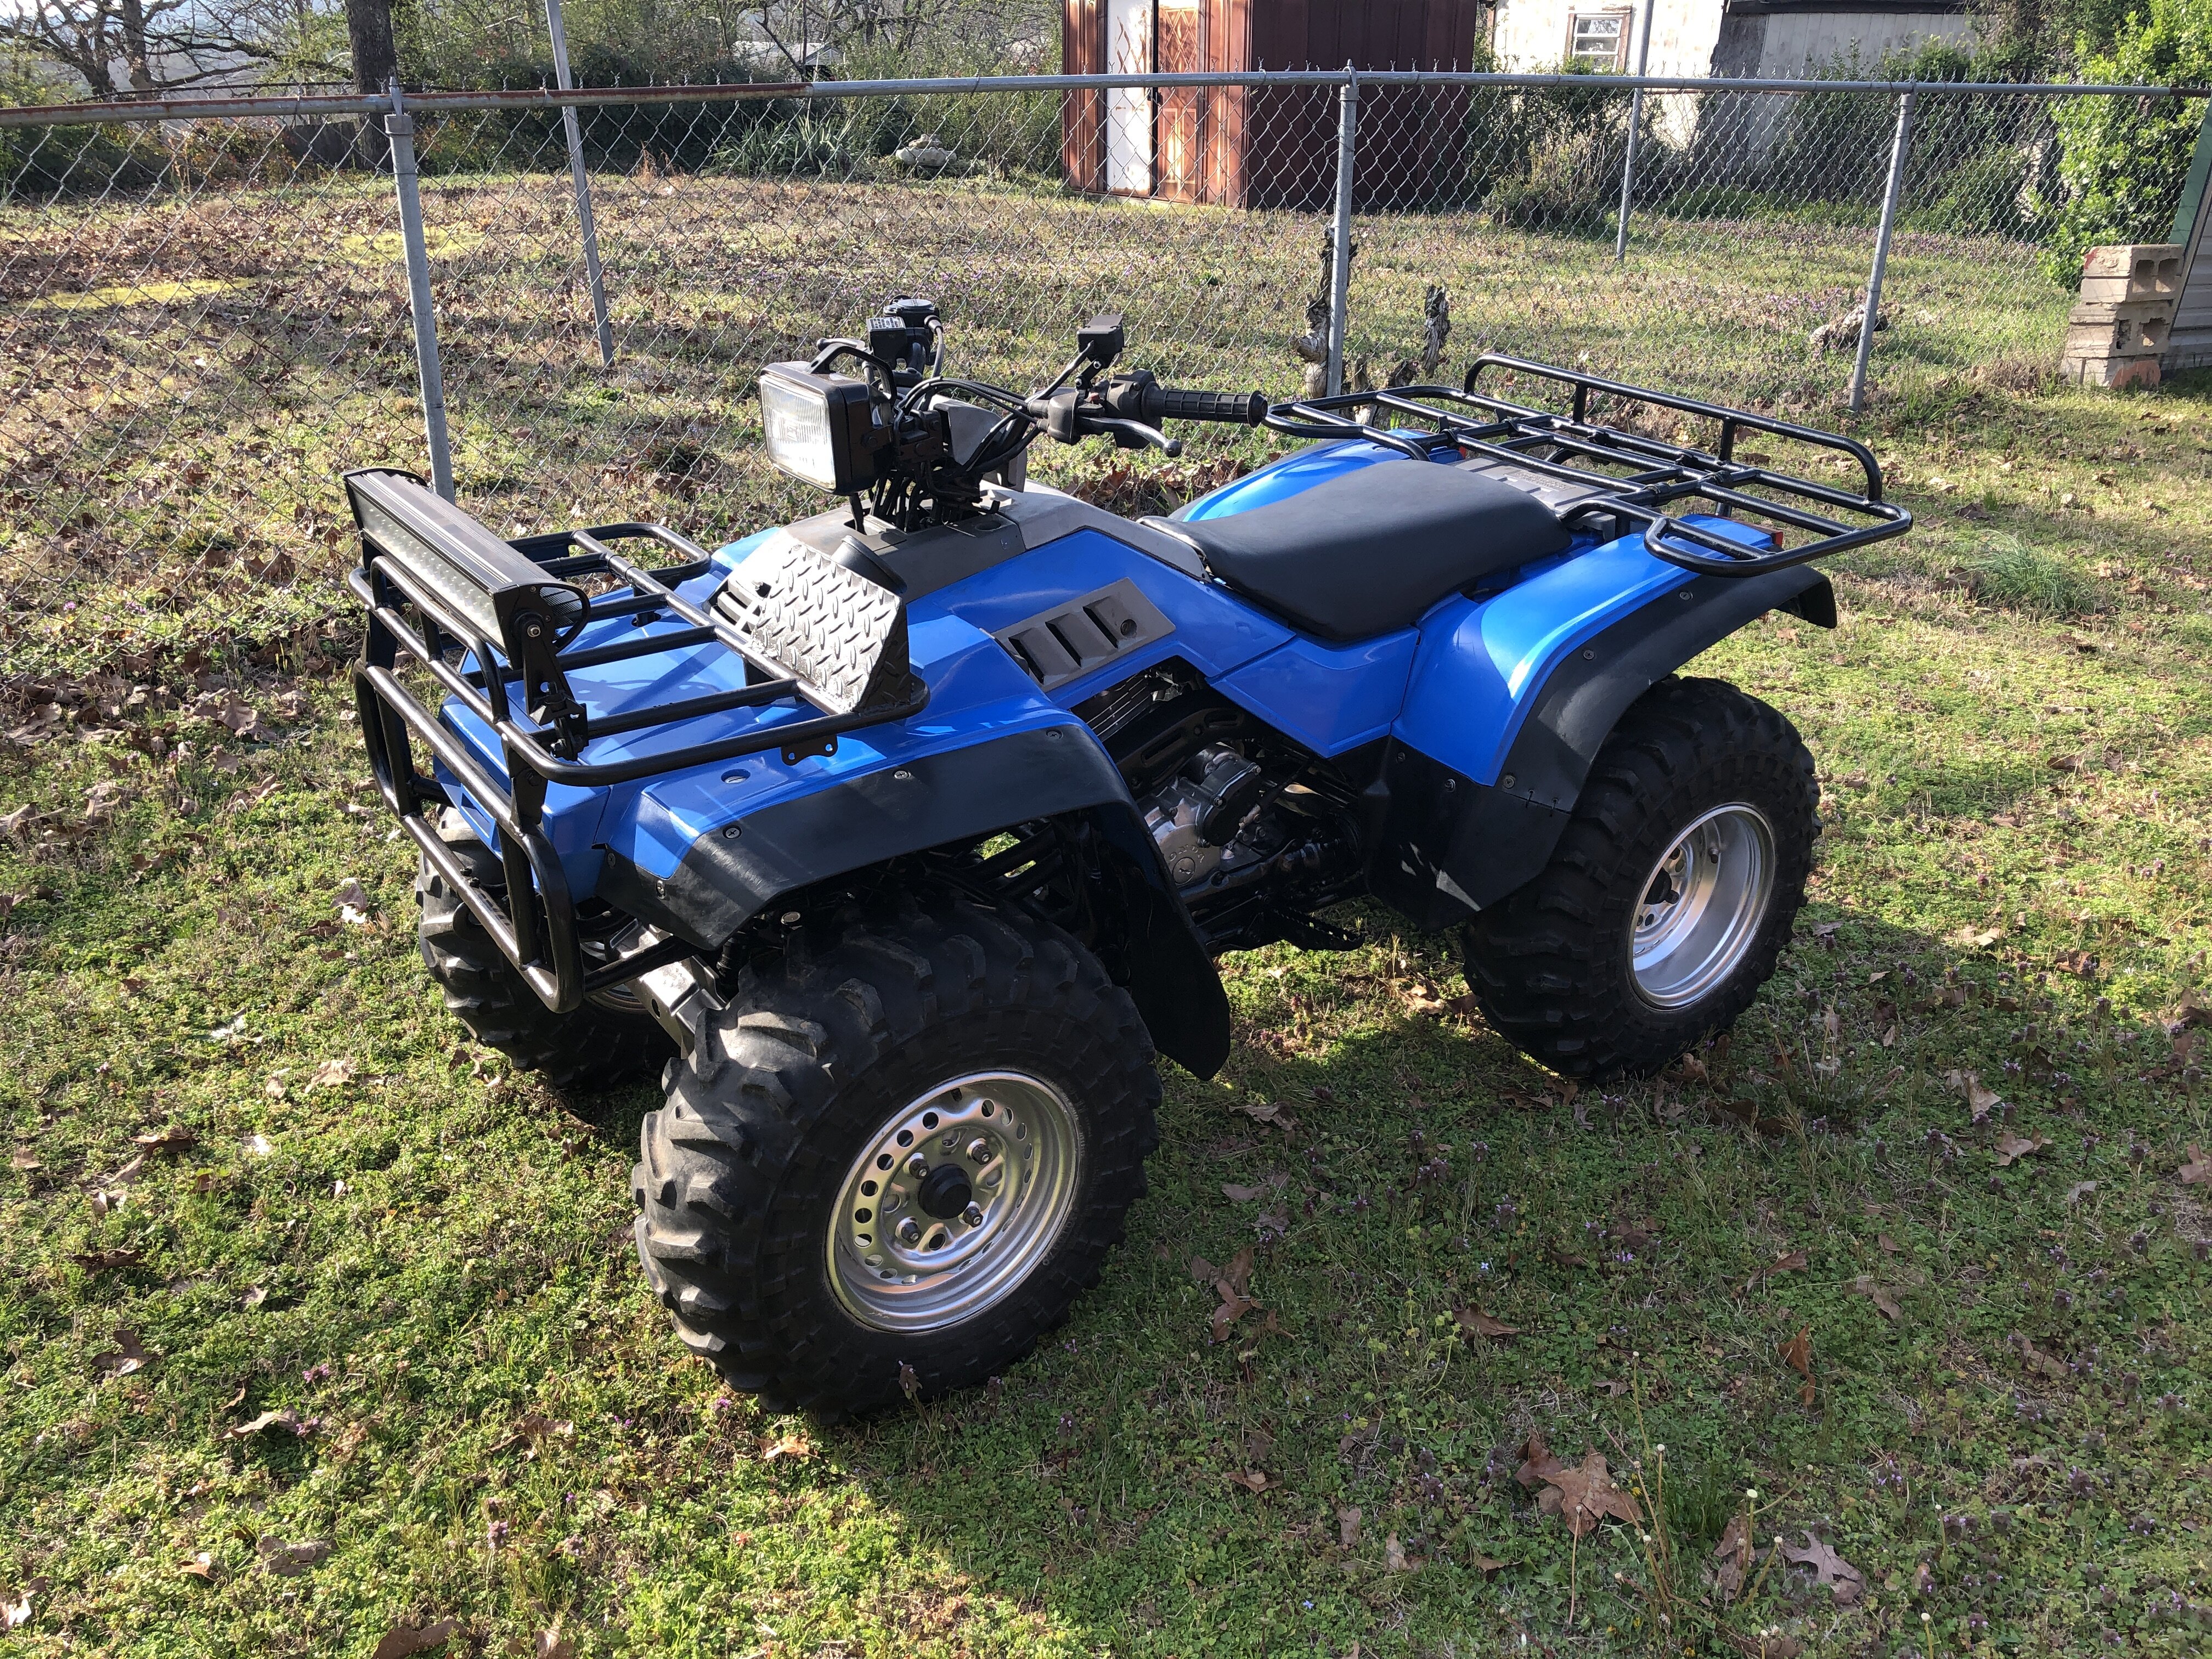 1988 trx350D foreman 4x4 For Sale Trade Wanted ATV